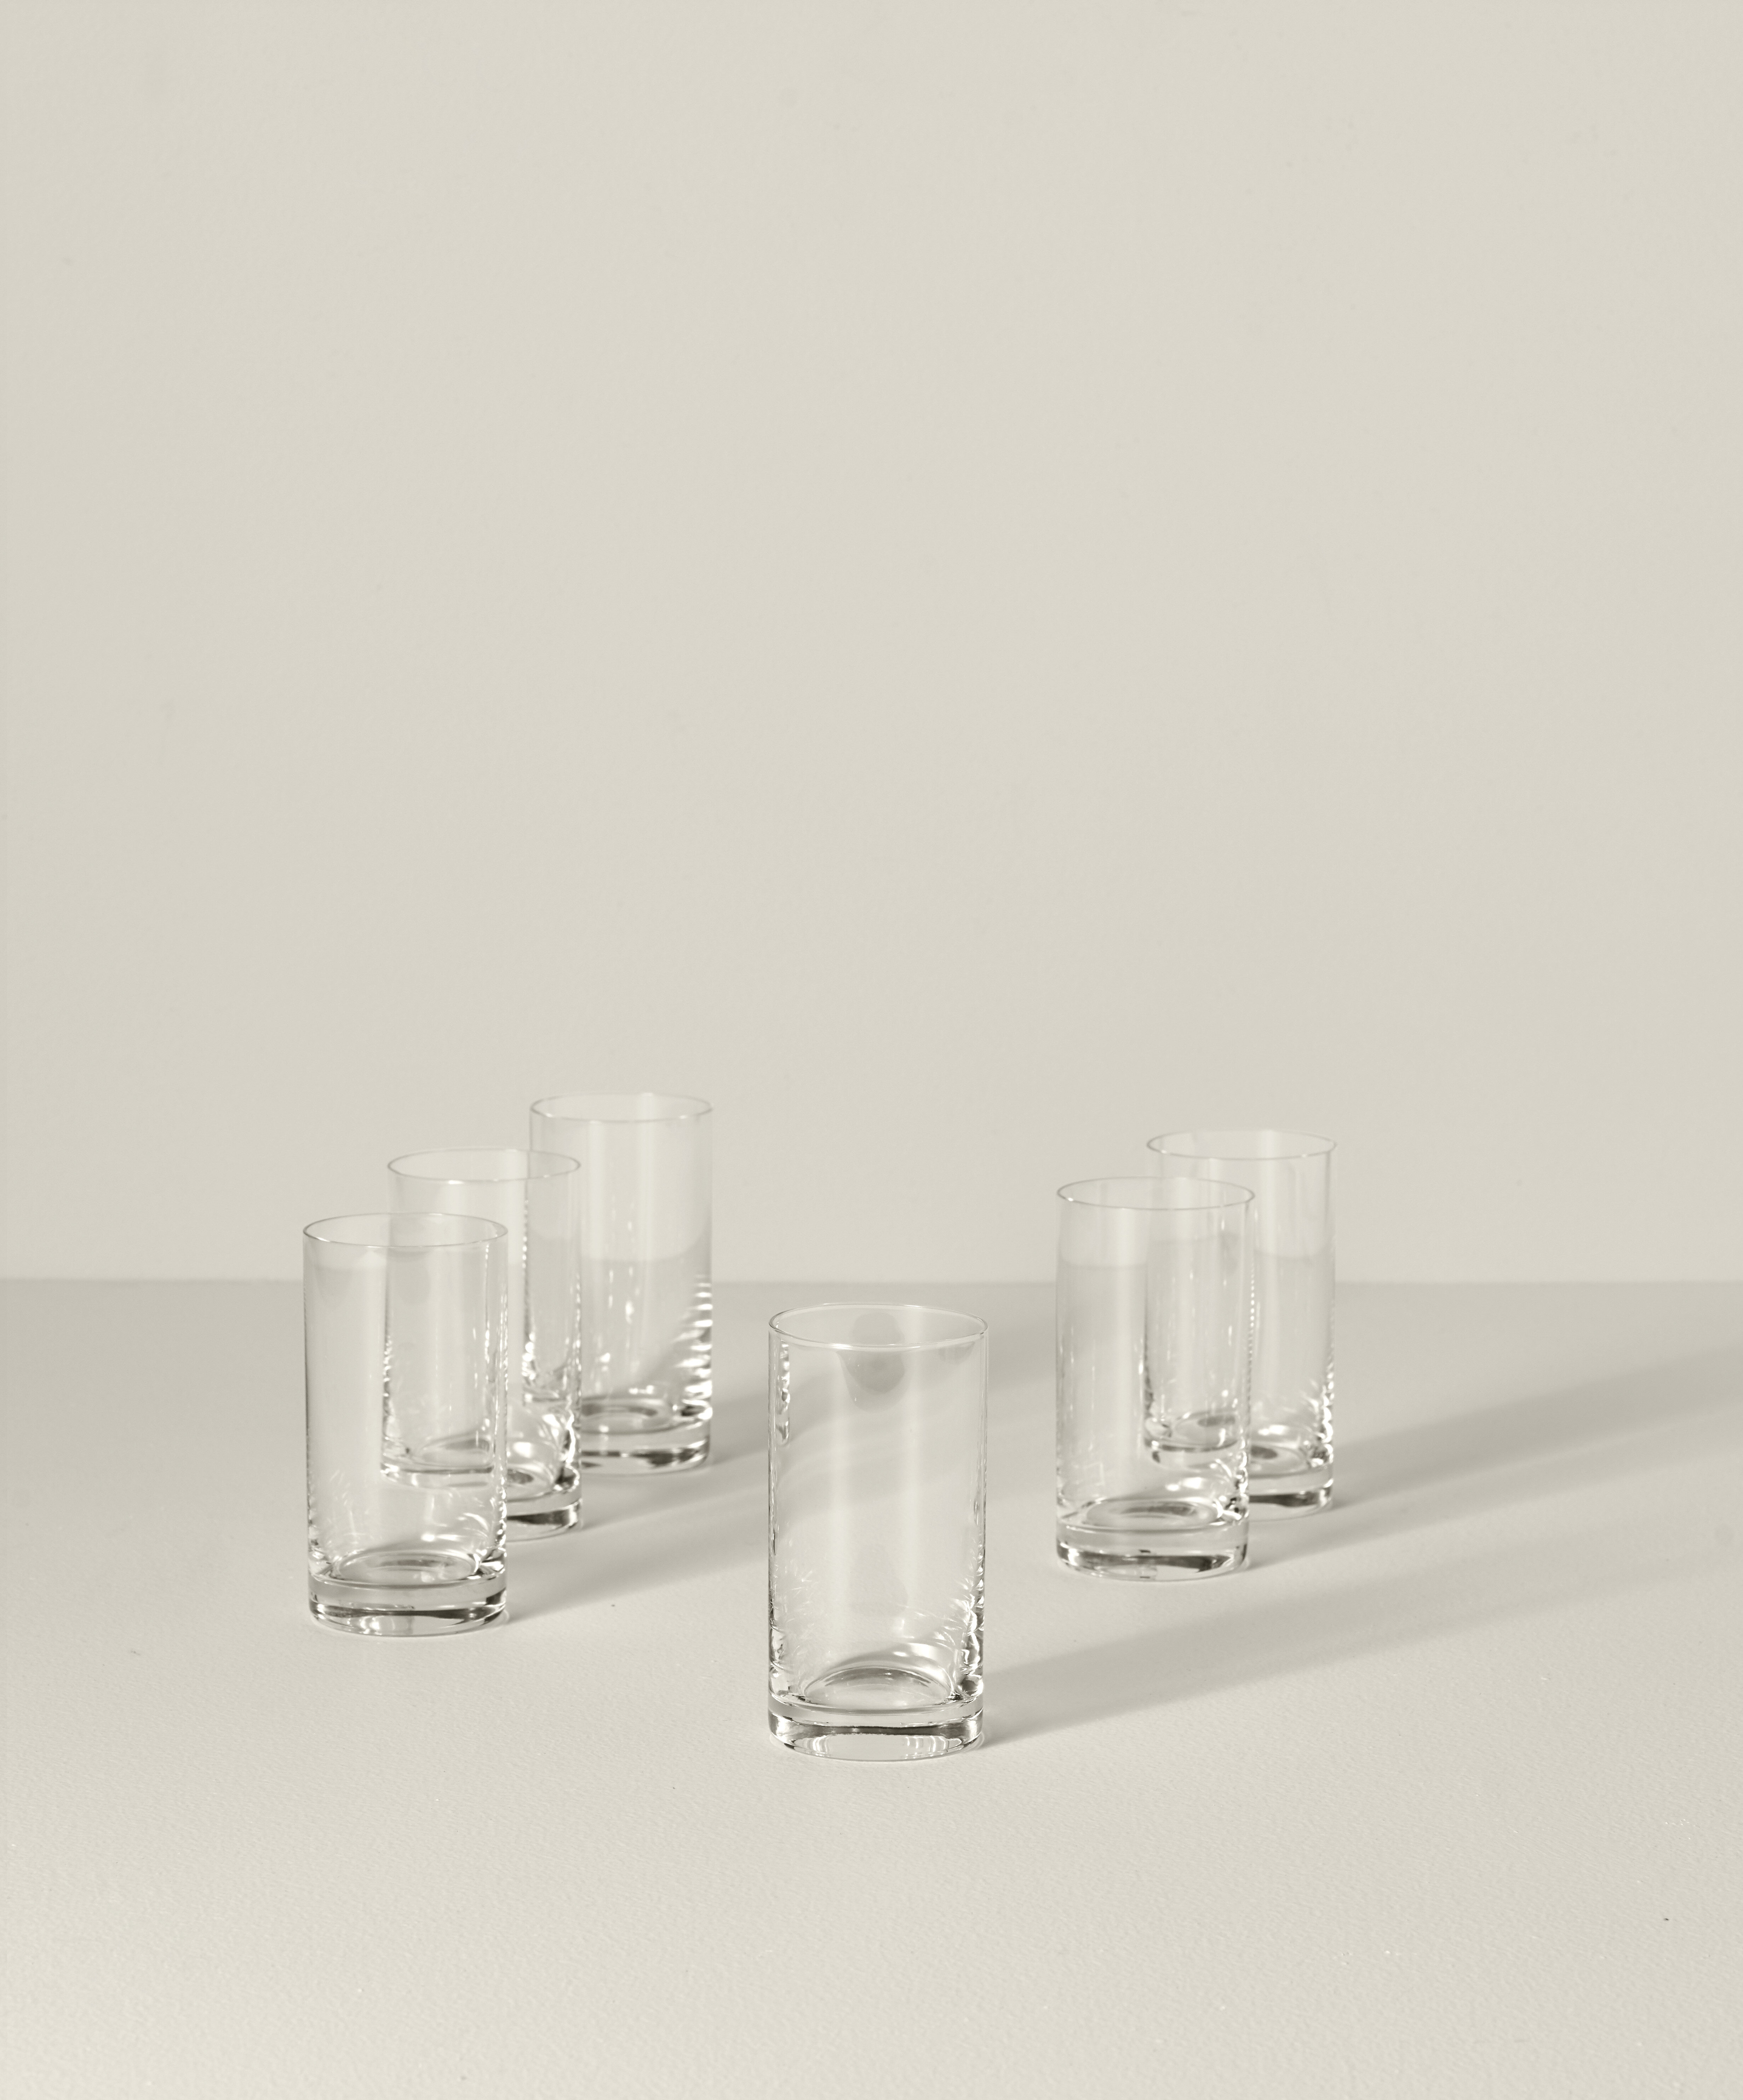 Oneida Stackables Clear Short & Tall Glasses, Set of 12